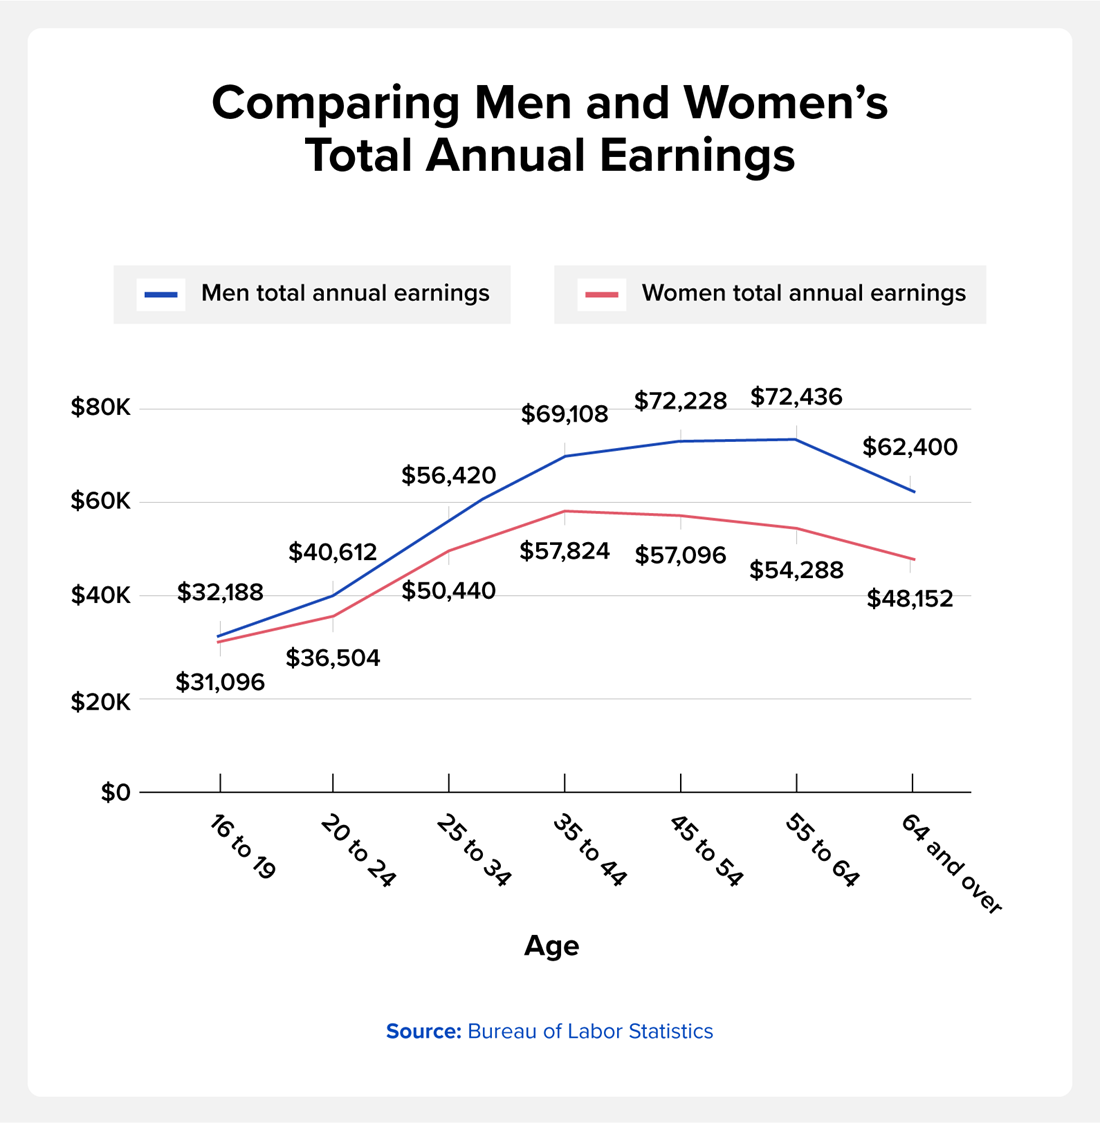 Comparing Men and Women's Total Annual Earnings